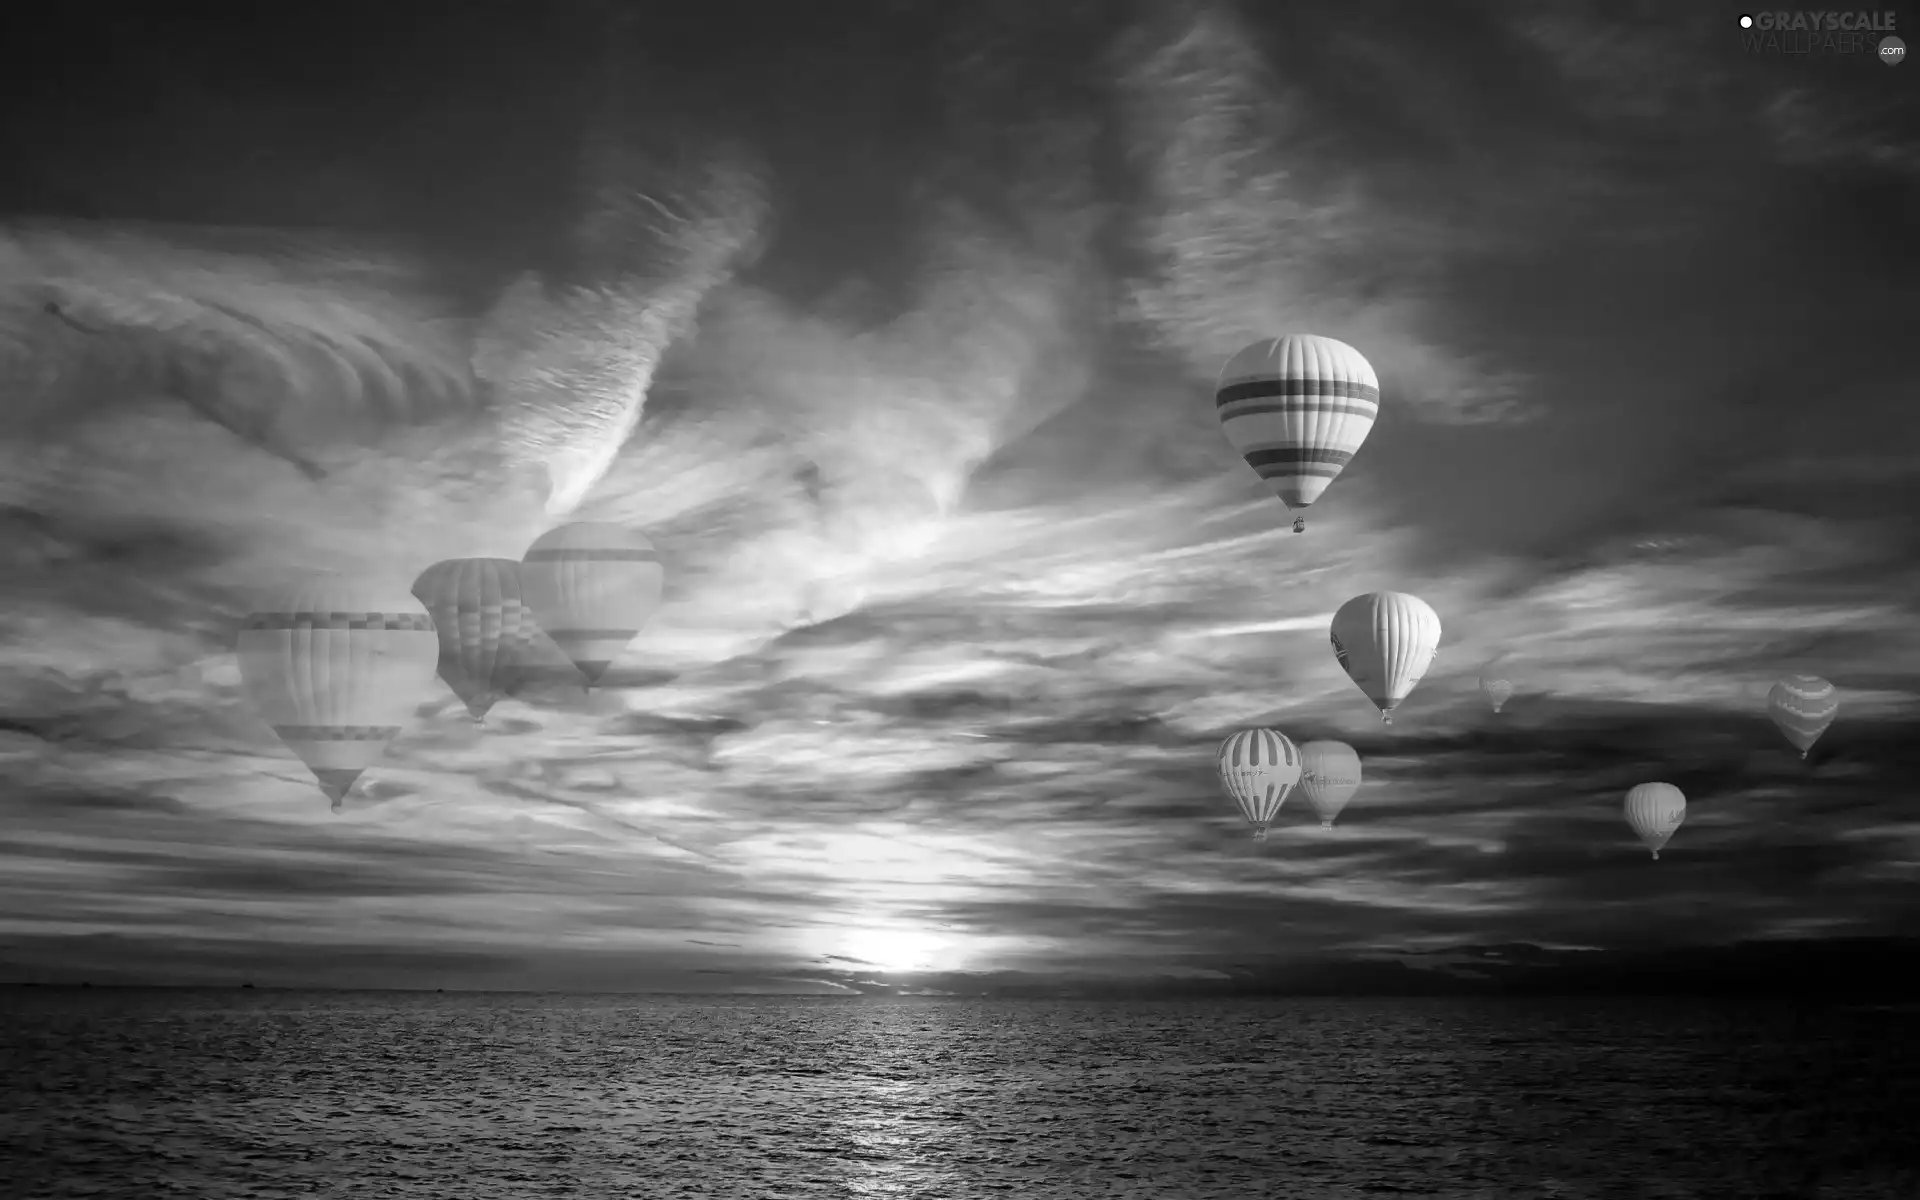 west, sun, sea, clouds, Balloons